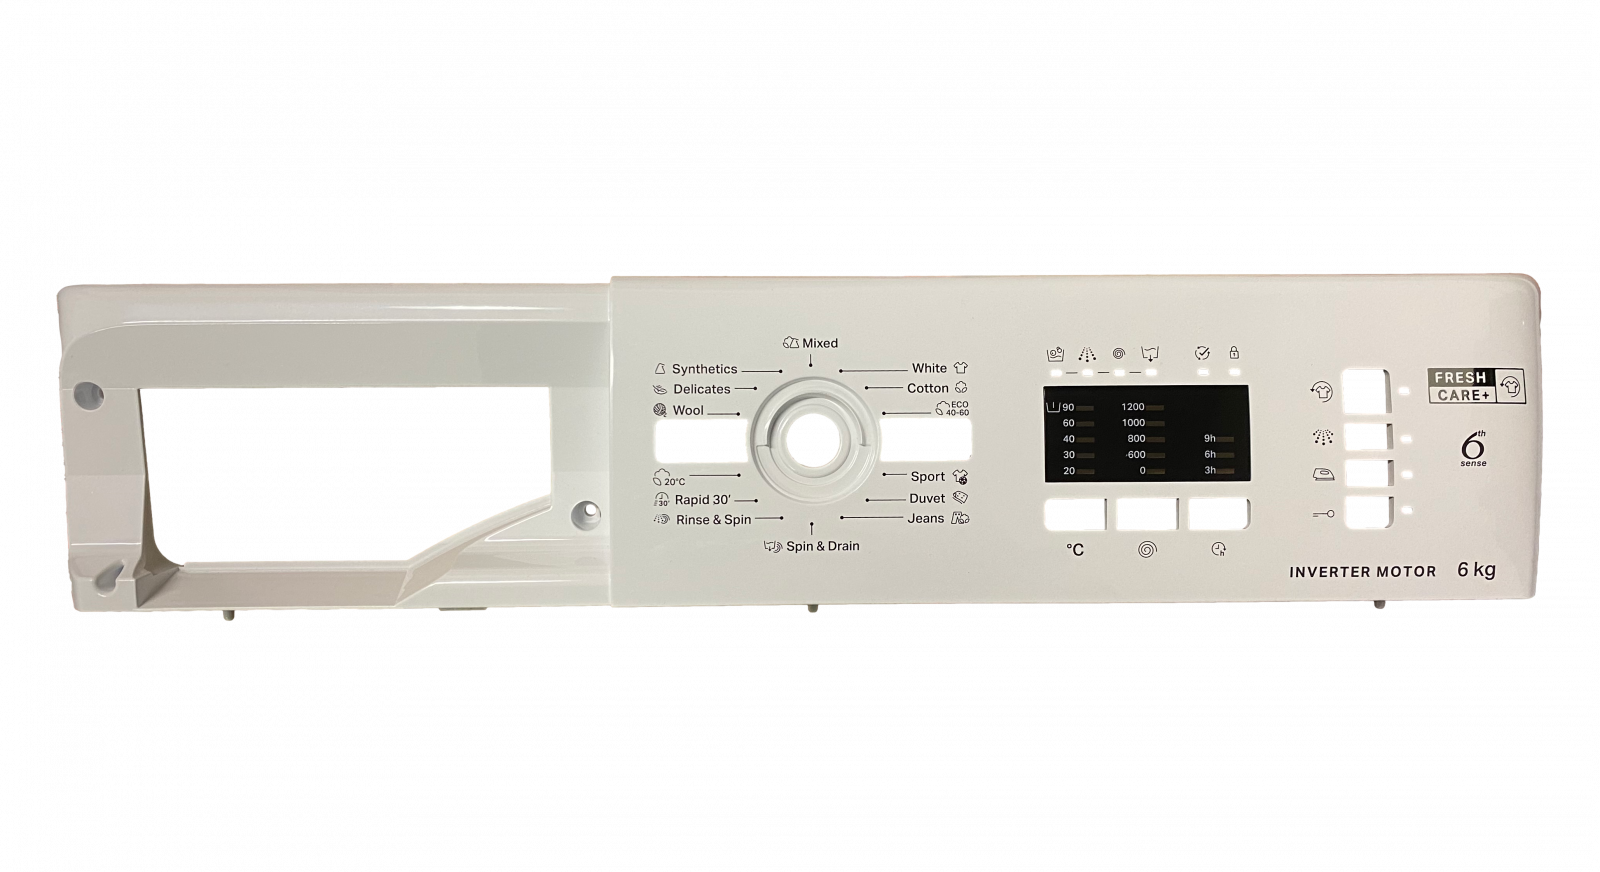 Control Panel, Console for Whirlpool Indesit Washing Machines - C00642097 Whirlpool / Indesit